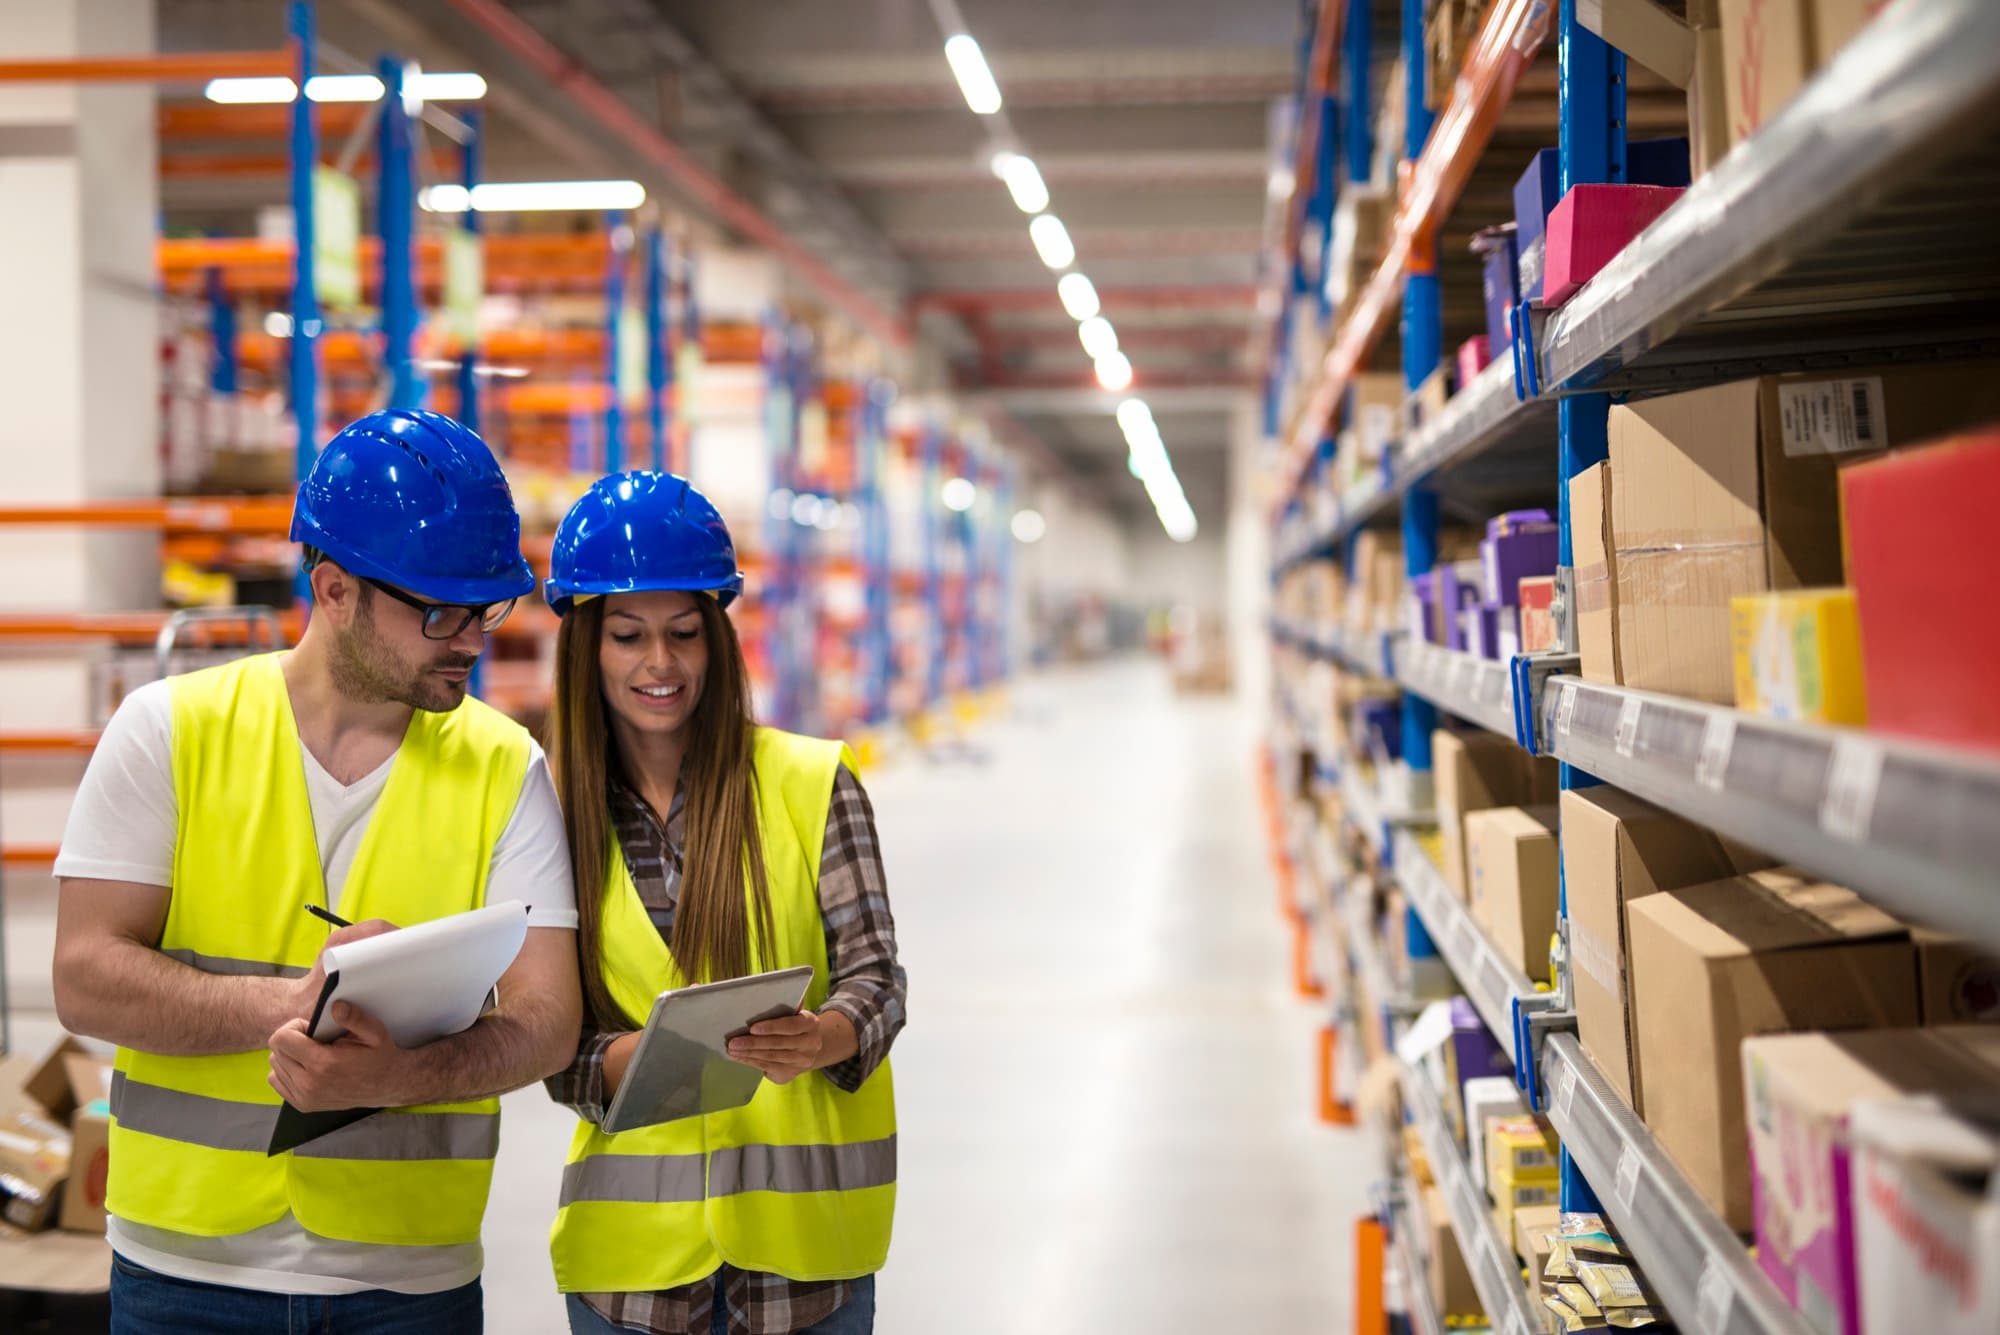 18 Basic Types of Inventory Management Used in Business